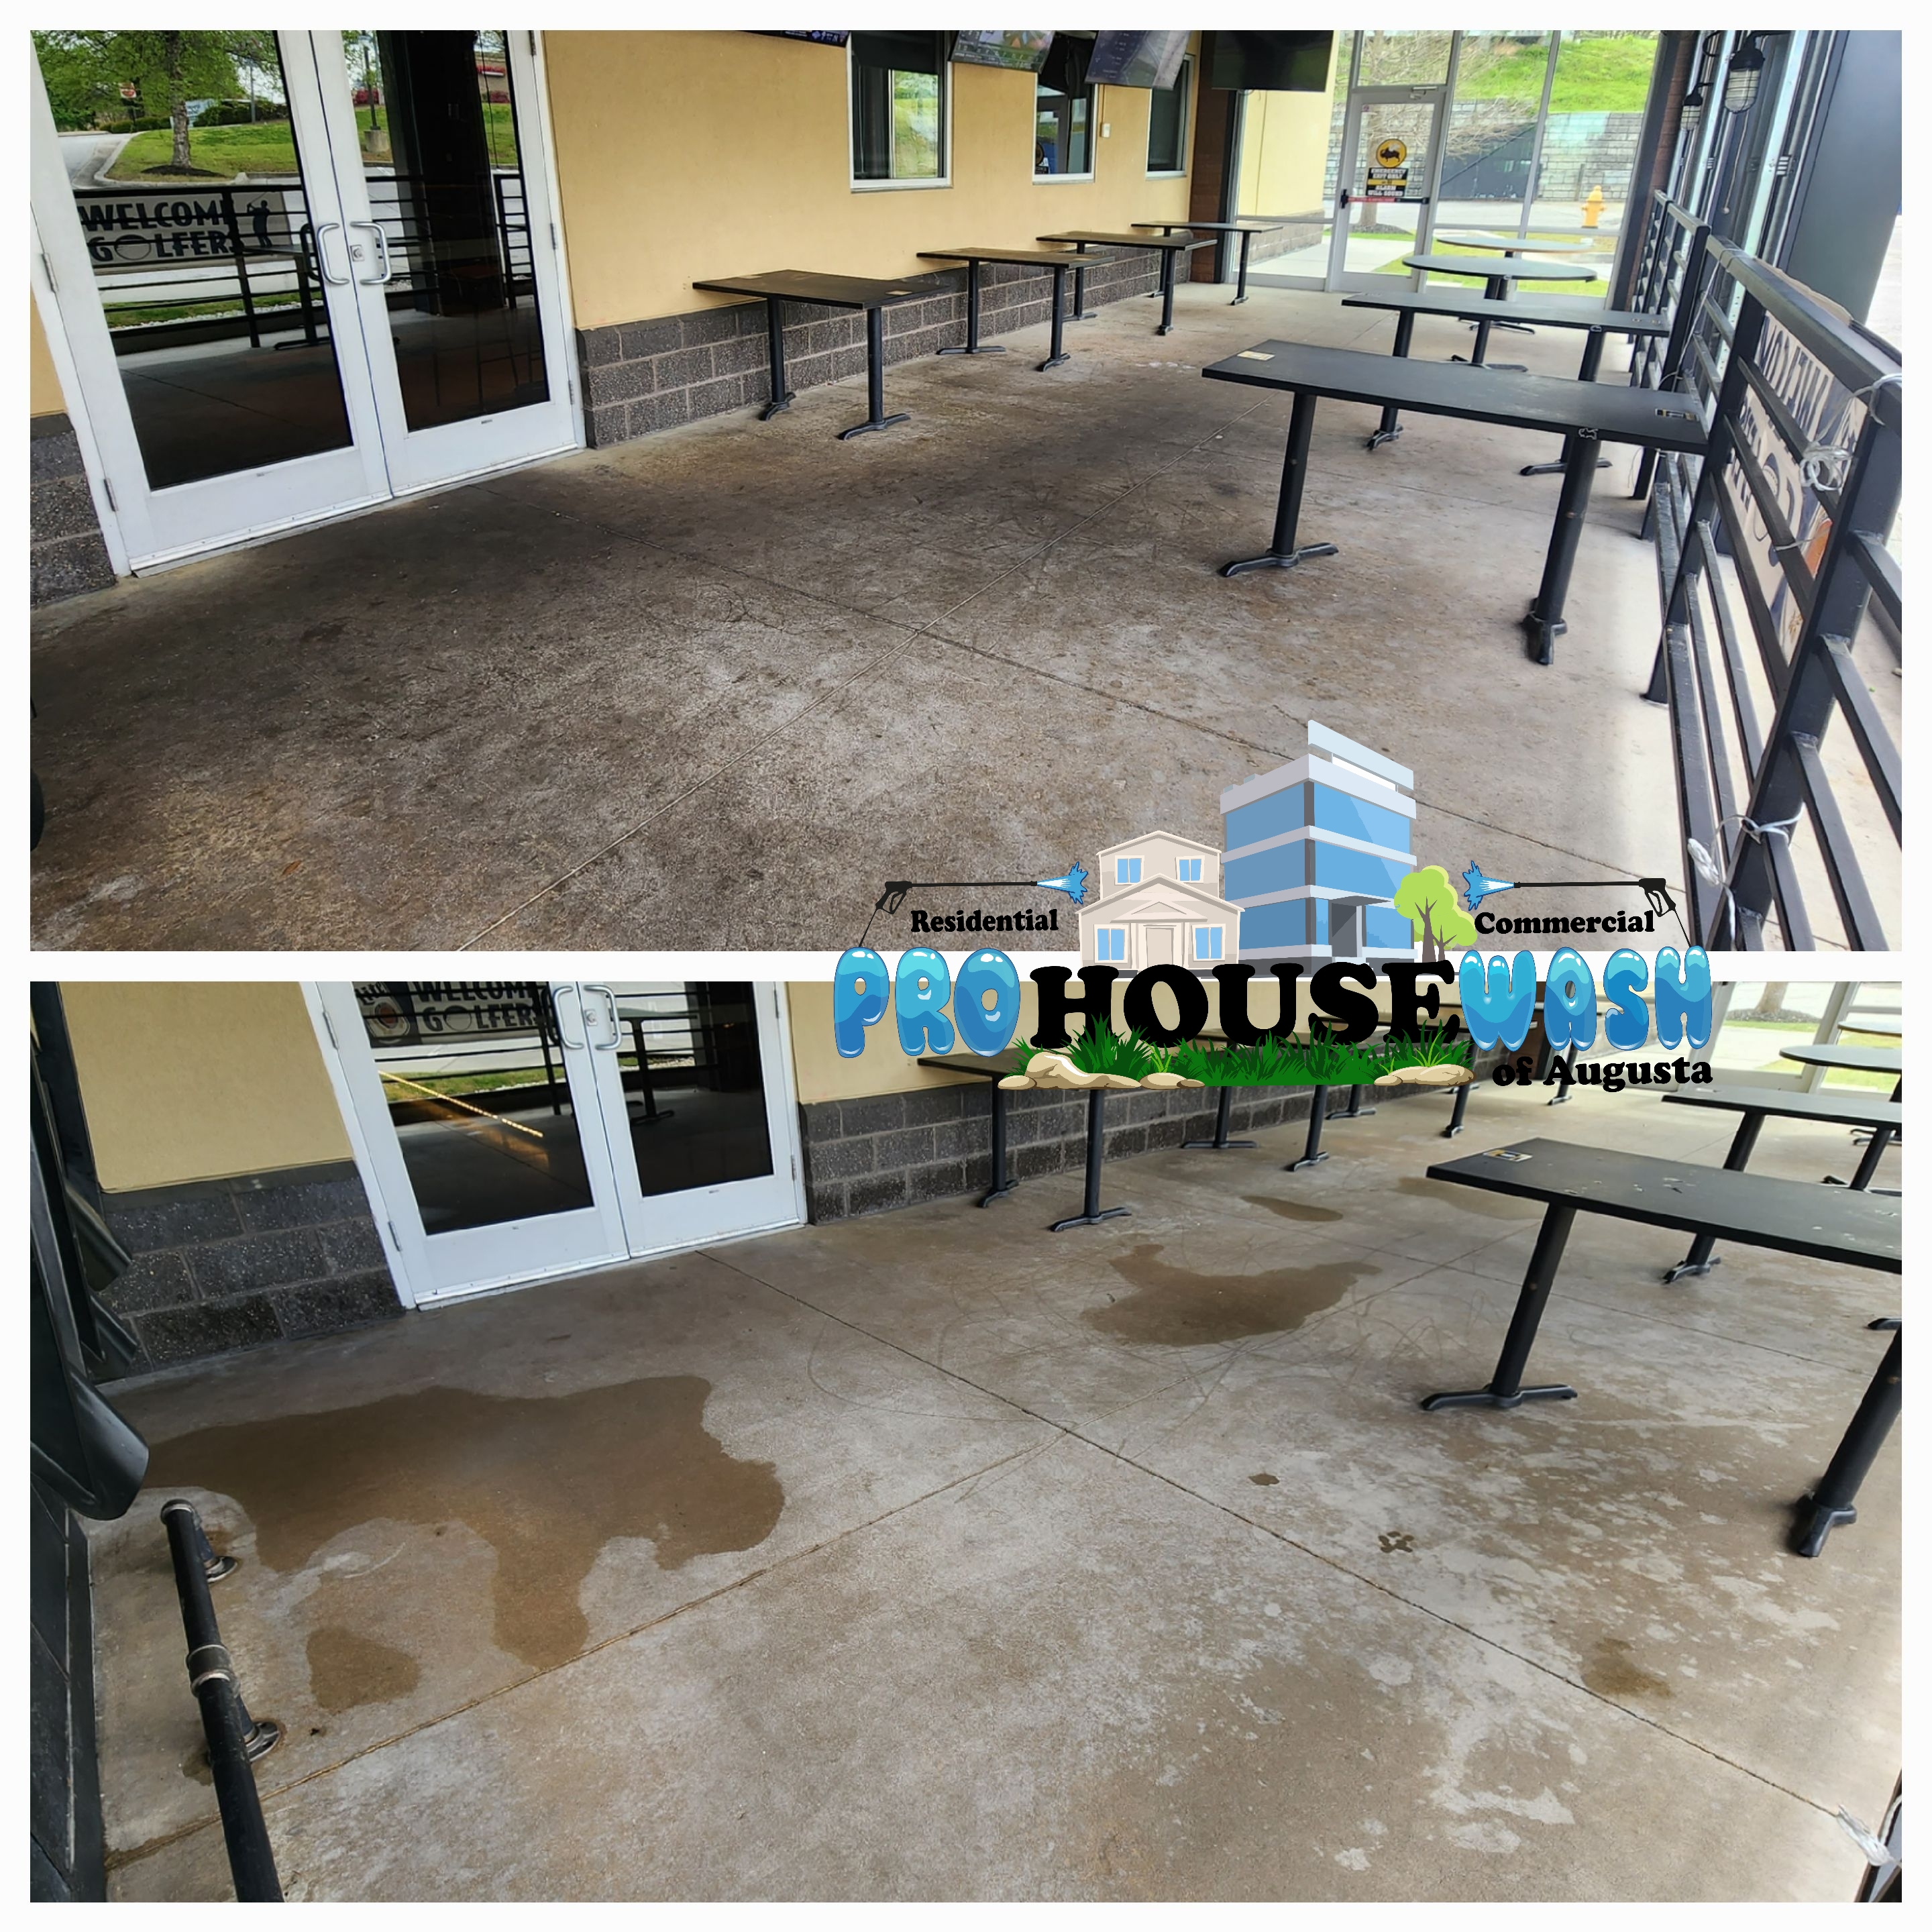 Commercial Pressure Washing for Buffalo Wild Wings in Augusta, GA Image